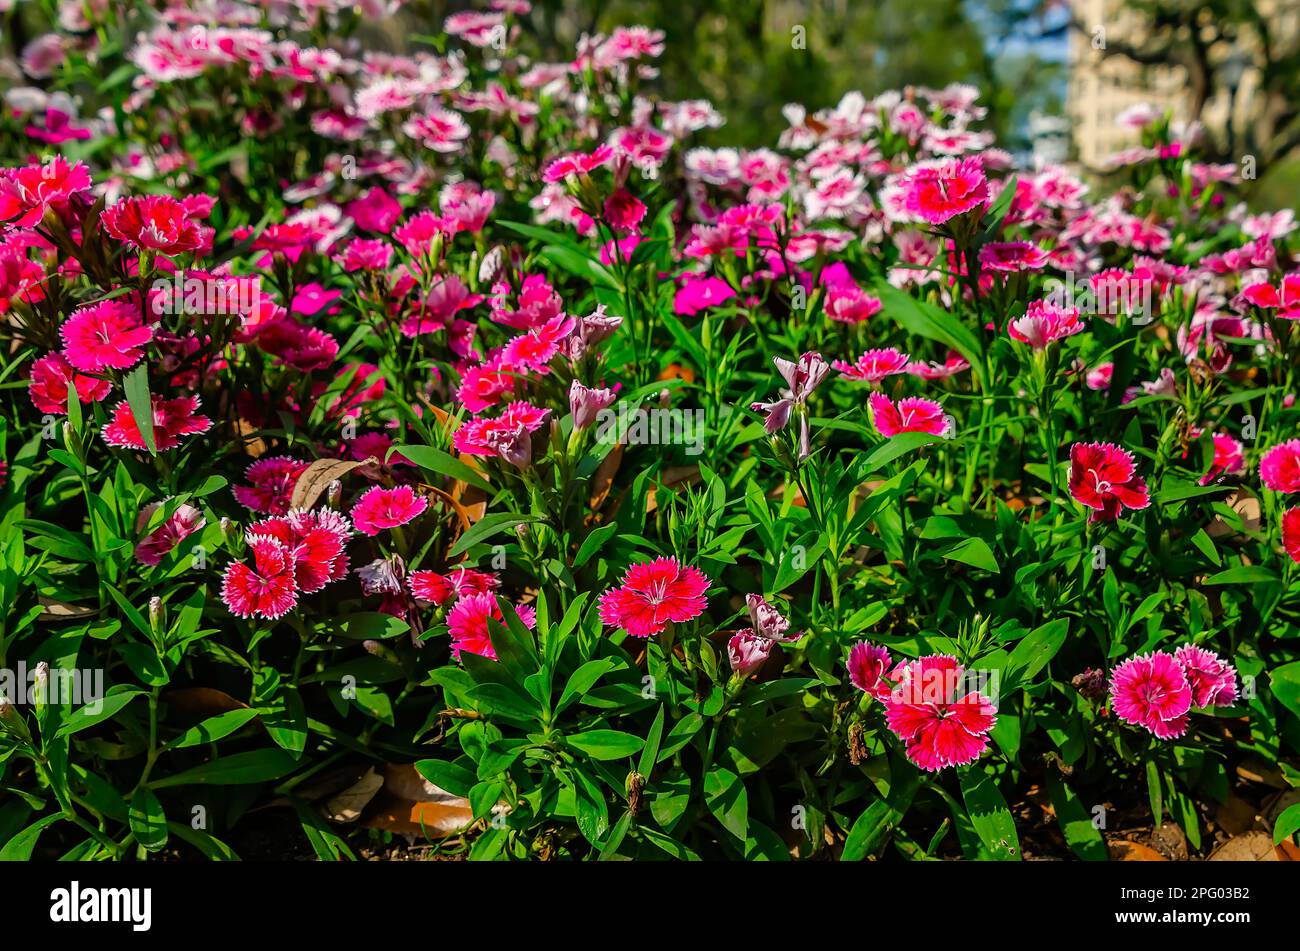 China pink (Dianthus chinensis), a type of dianthus, is pictured, March 8, 2023, in Mobile, Alabama. China pink is a perennial plant. Stock Photo